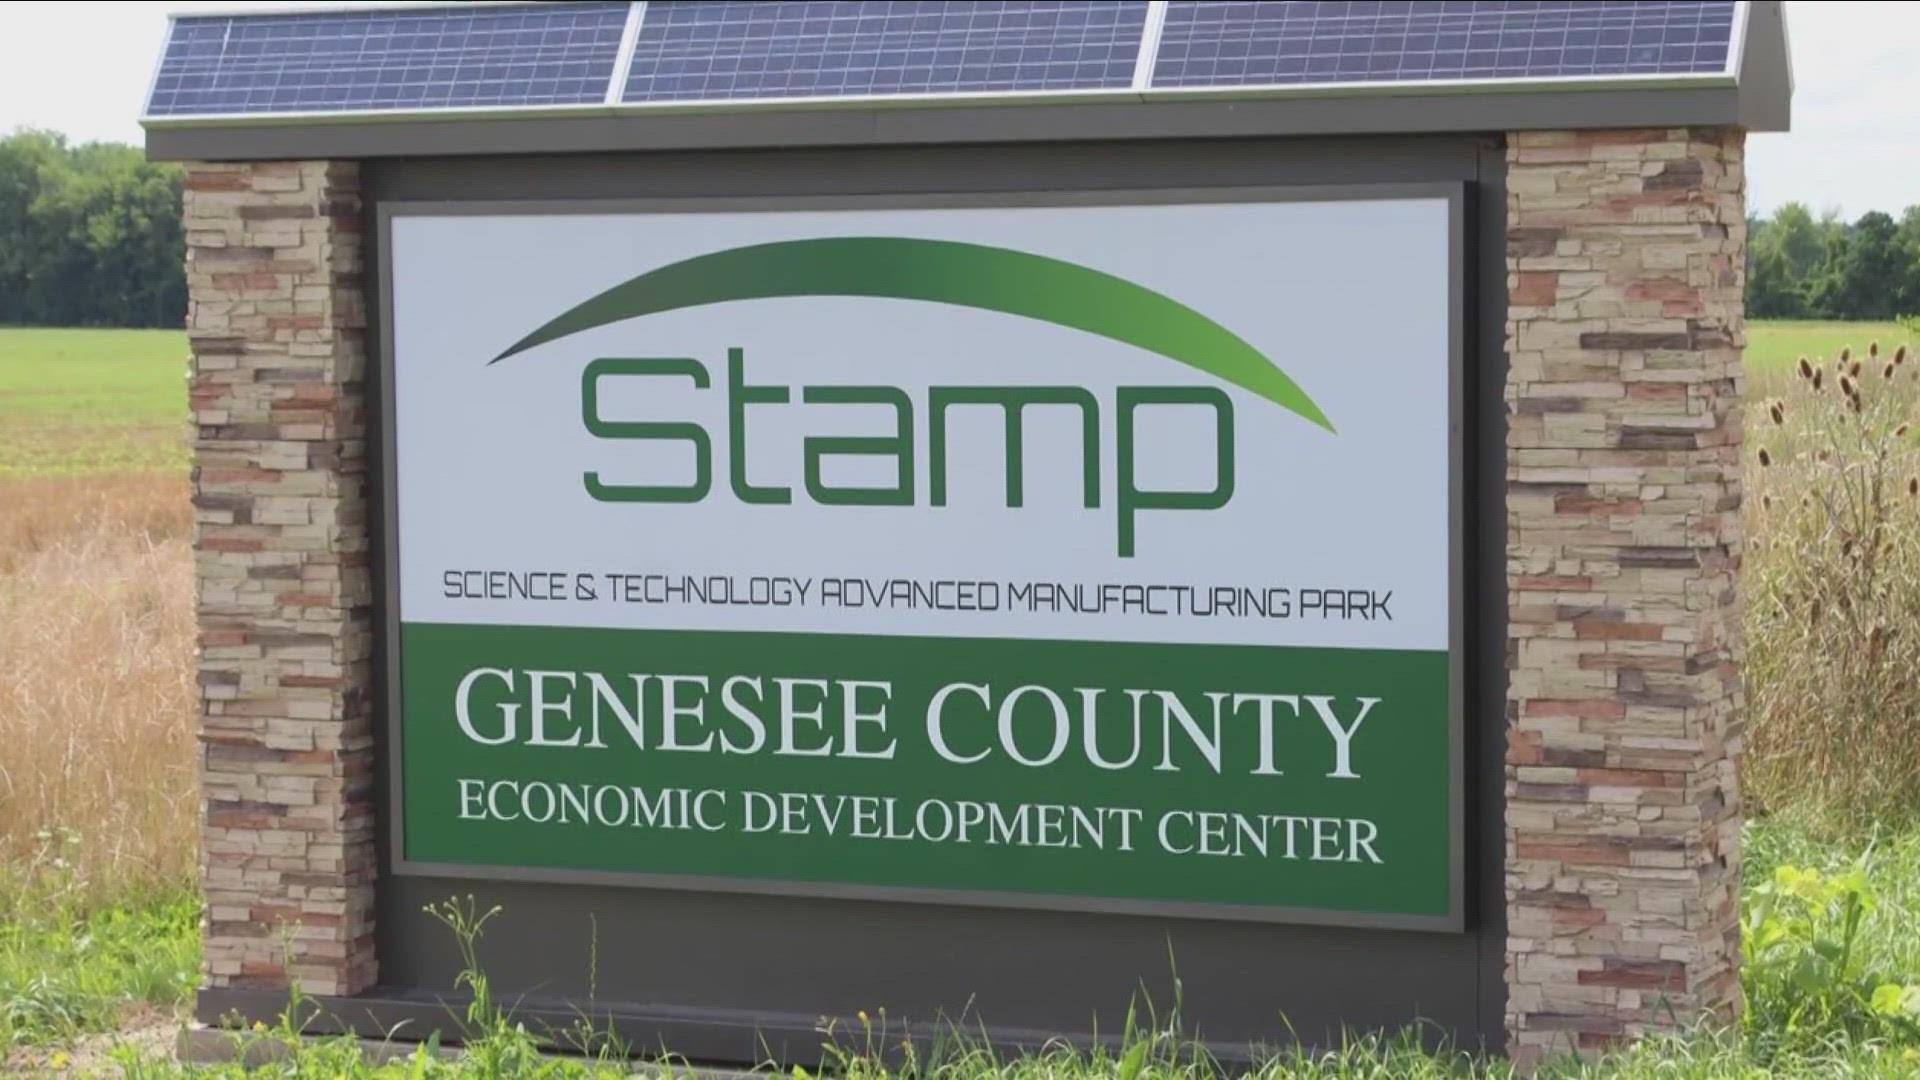 State environmental officials cited the Genesee County Economic Development Center for a drilling mishap in a sensitive wetland. It’s the second spill since August.